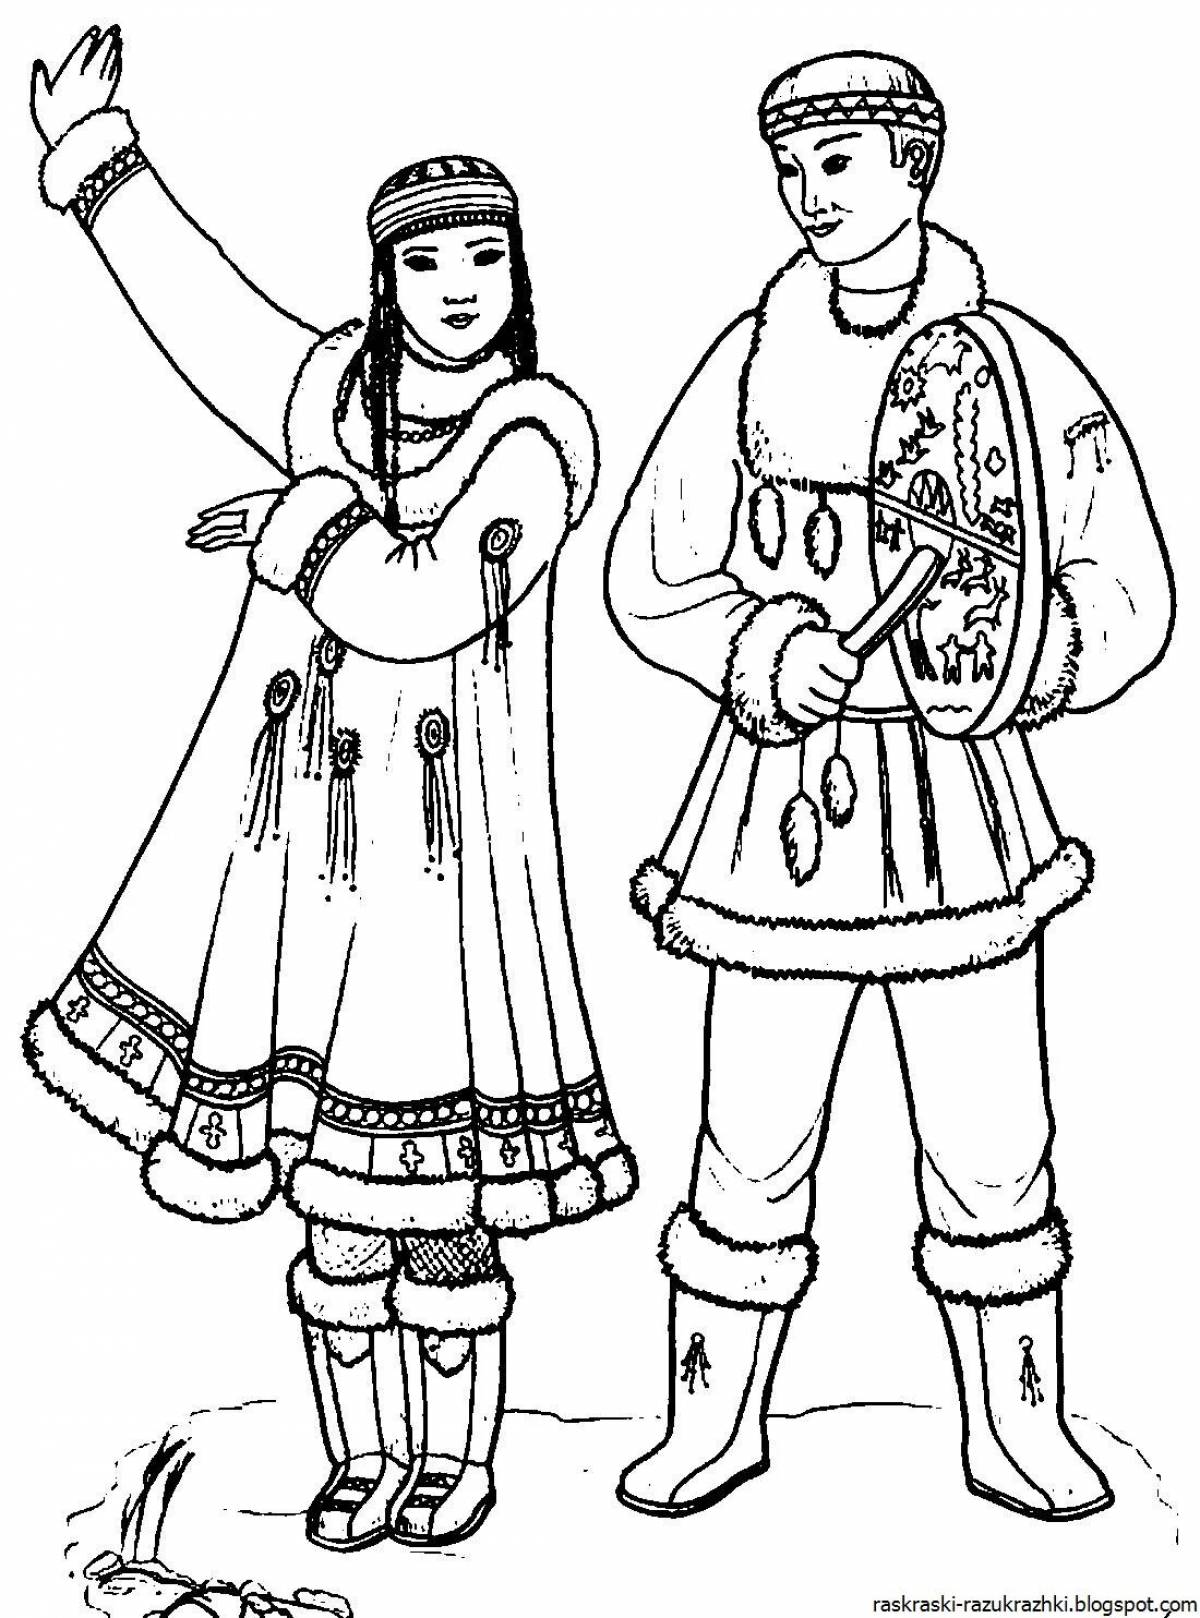 Coloring bright folk costumes for children